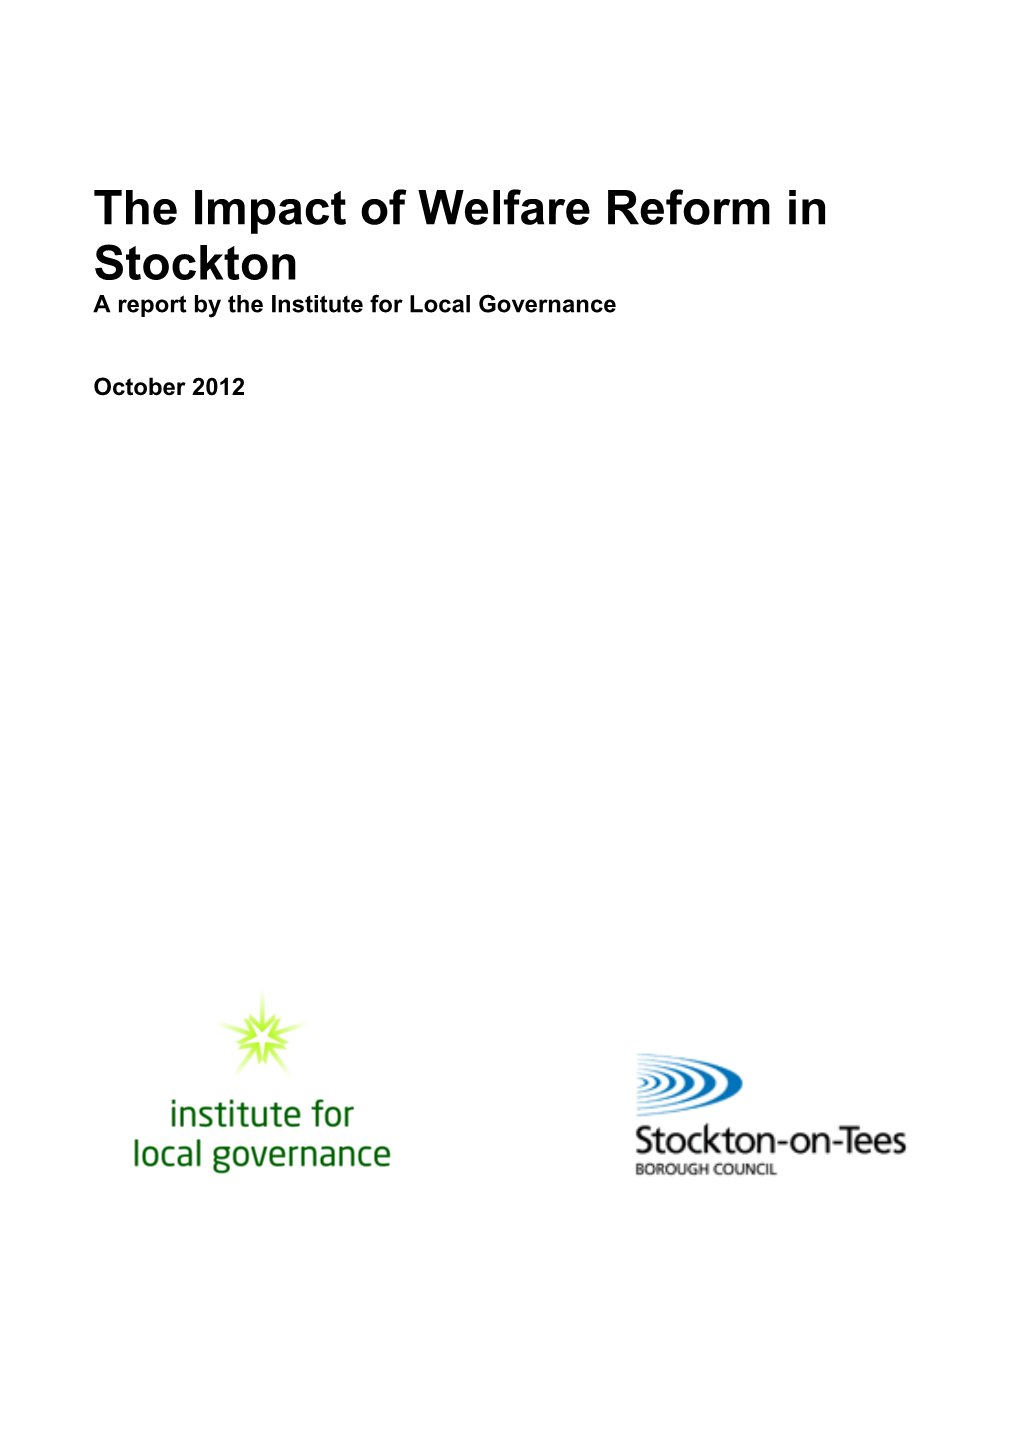 A Report by the Institute for Local Governance